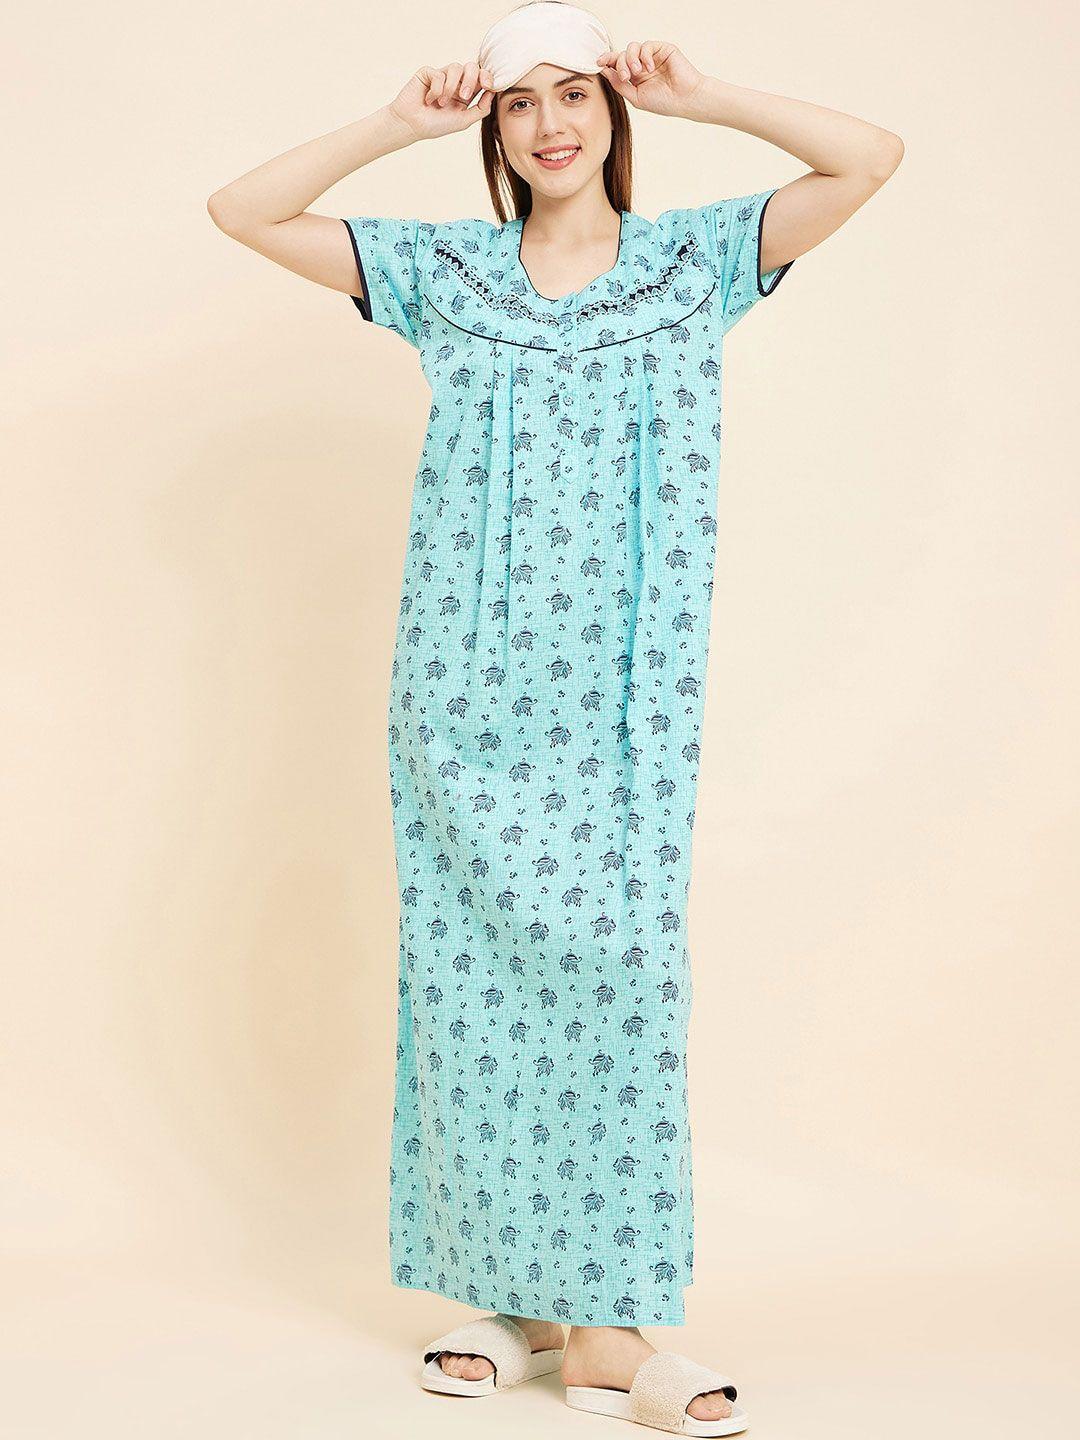 sweet-dreams-turquoise-blue-printed-cotton-maxi-nightdress